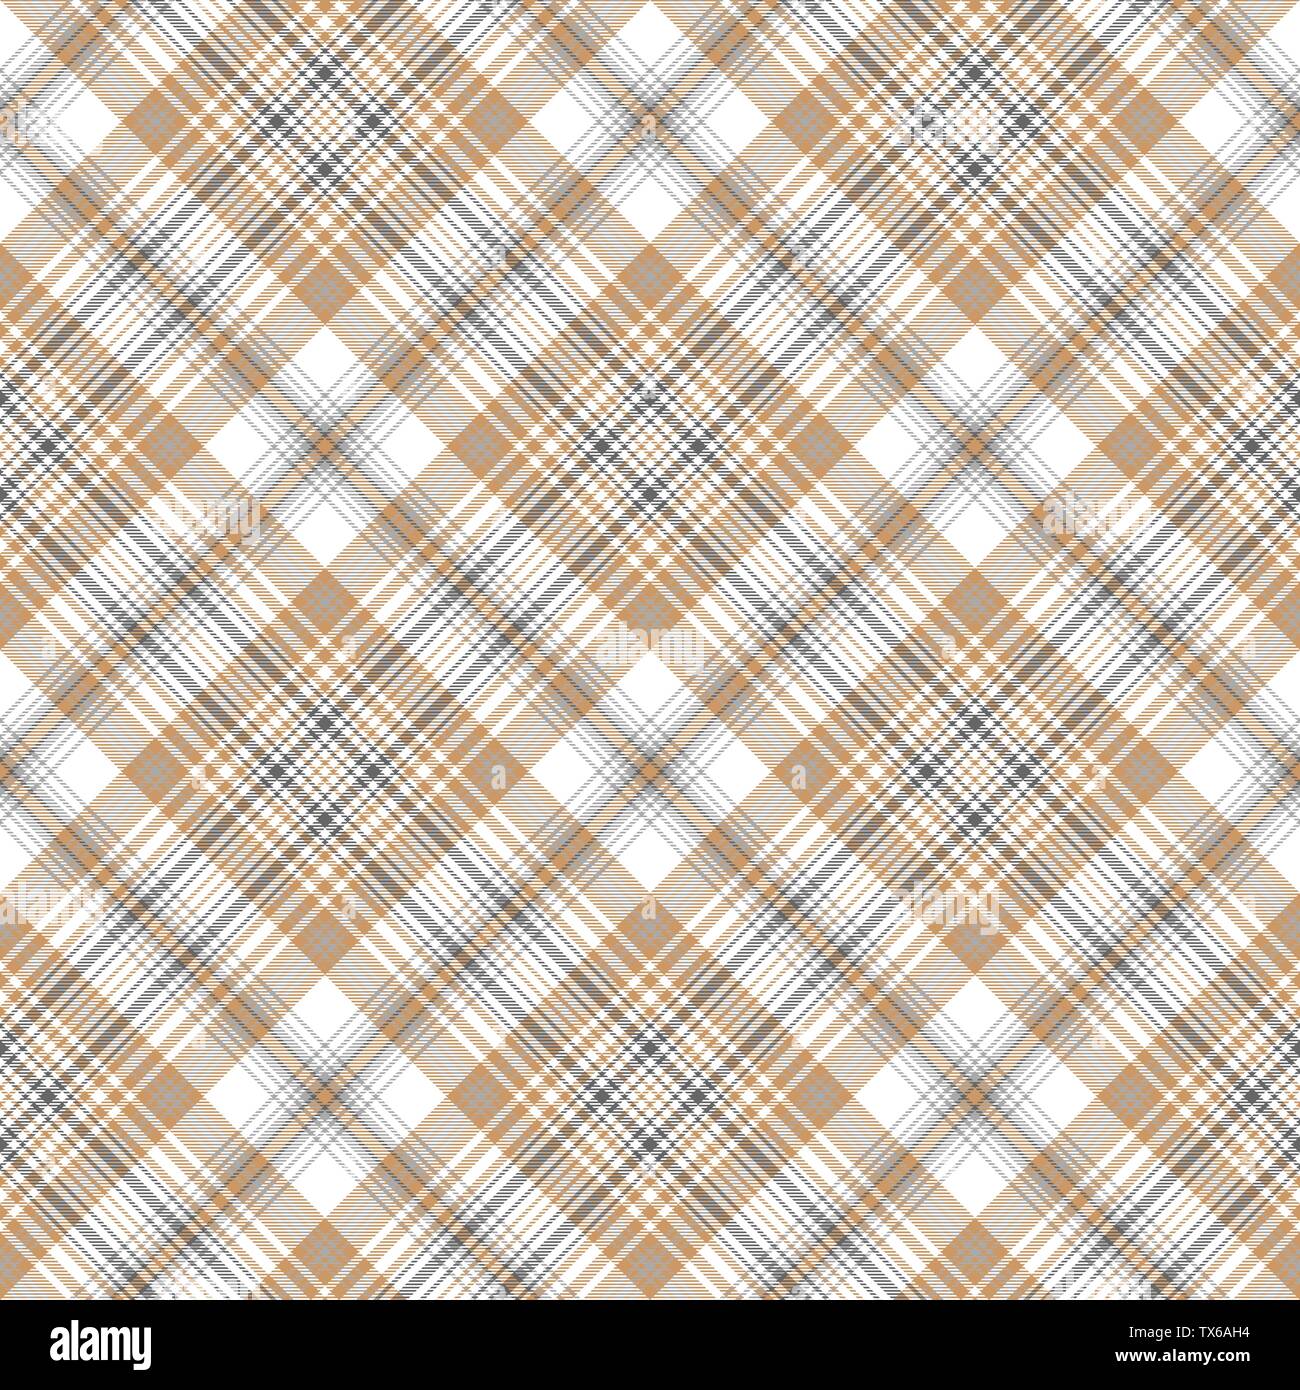 Gold and platinum color check plaid seamless pattern. Vector illustration. Stock Vector